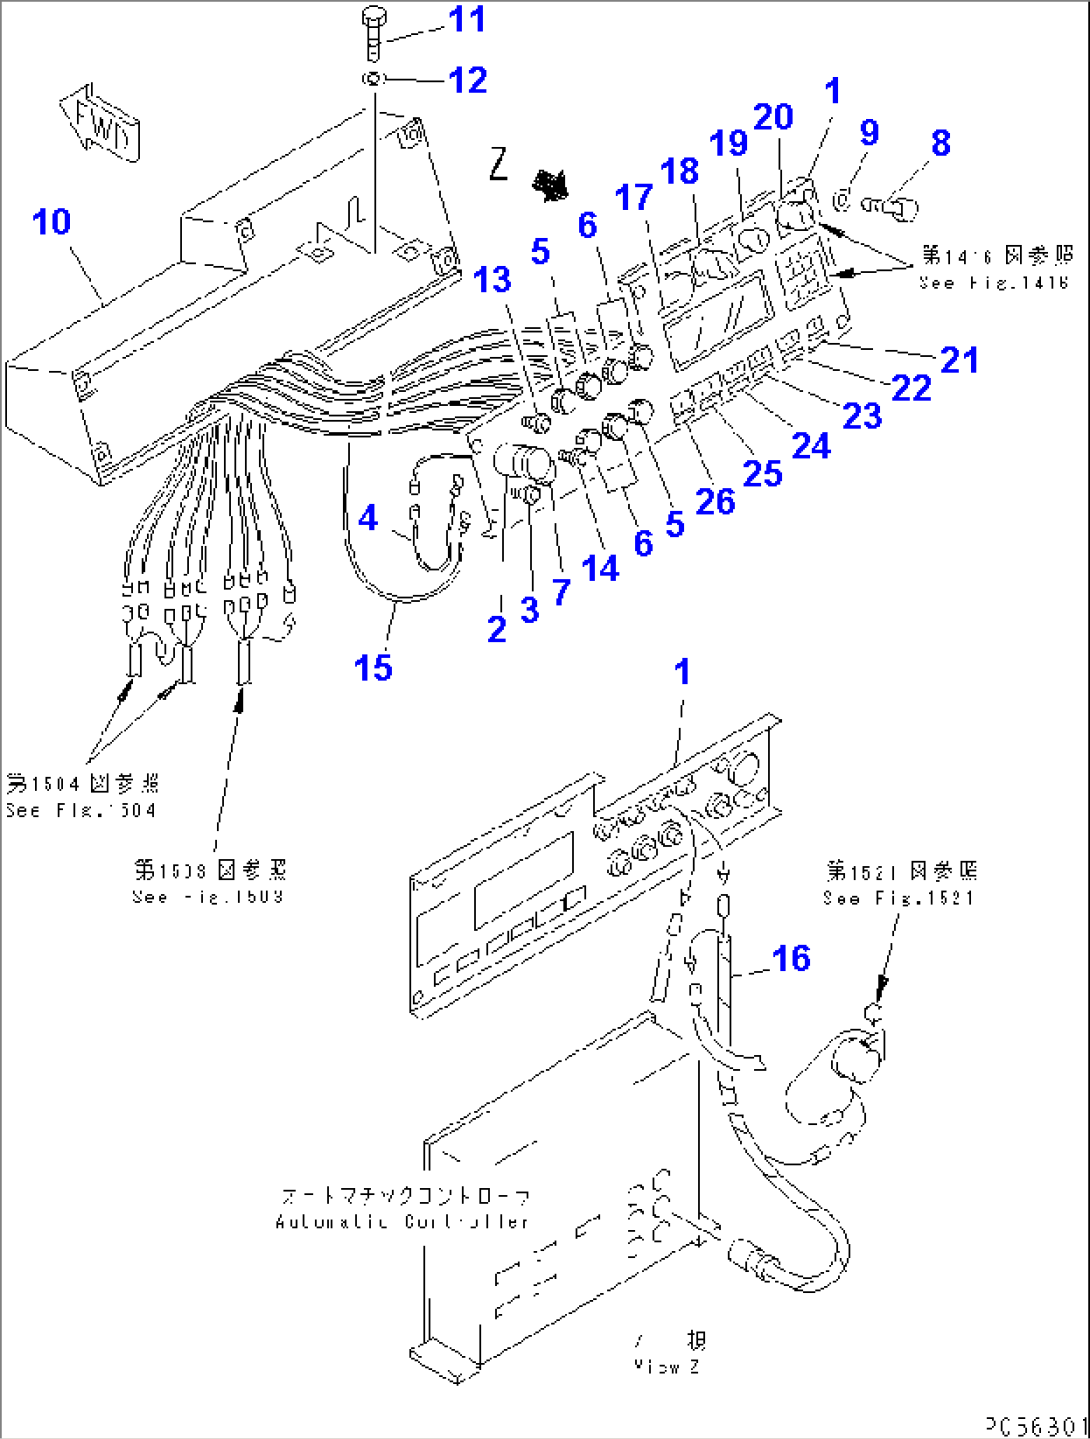 INSTRUMENT PANEL (UPPER) (WITH AUTOMATIC SPLINKLING SYSTEM) (1/2)